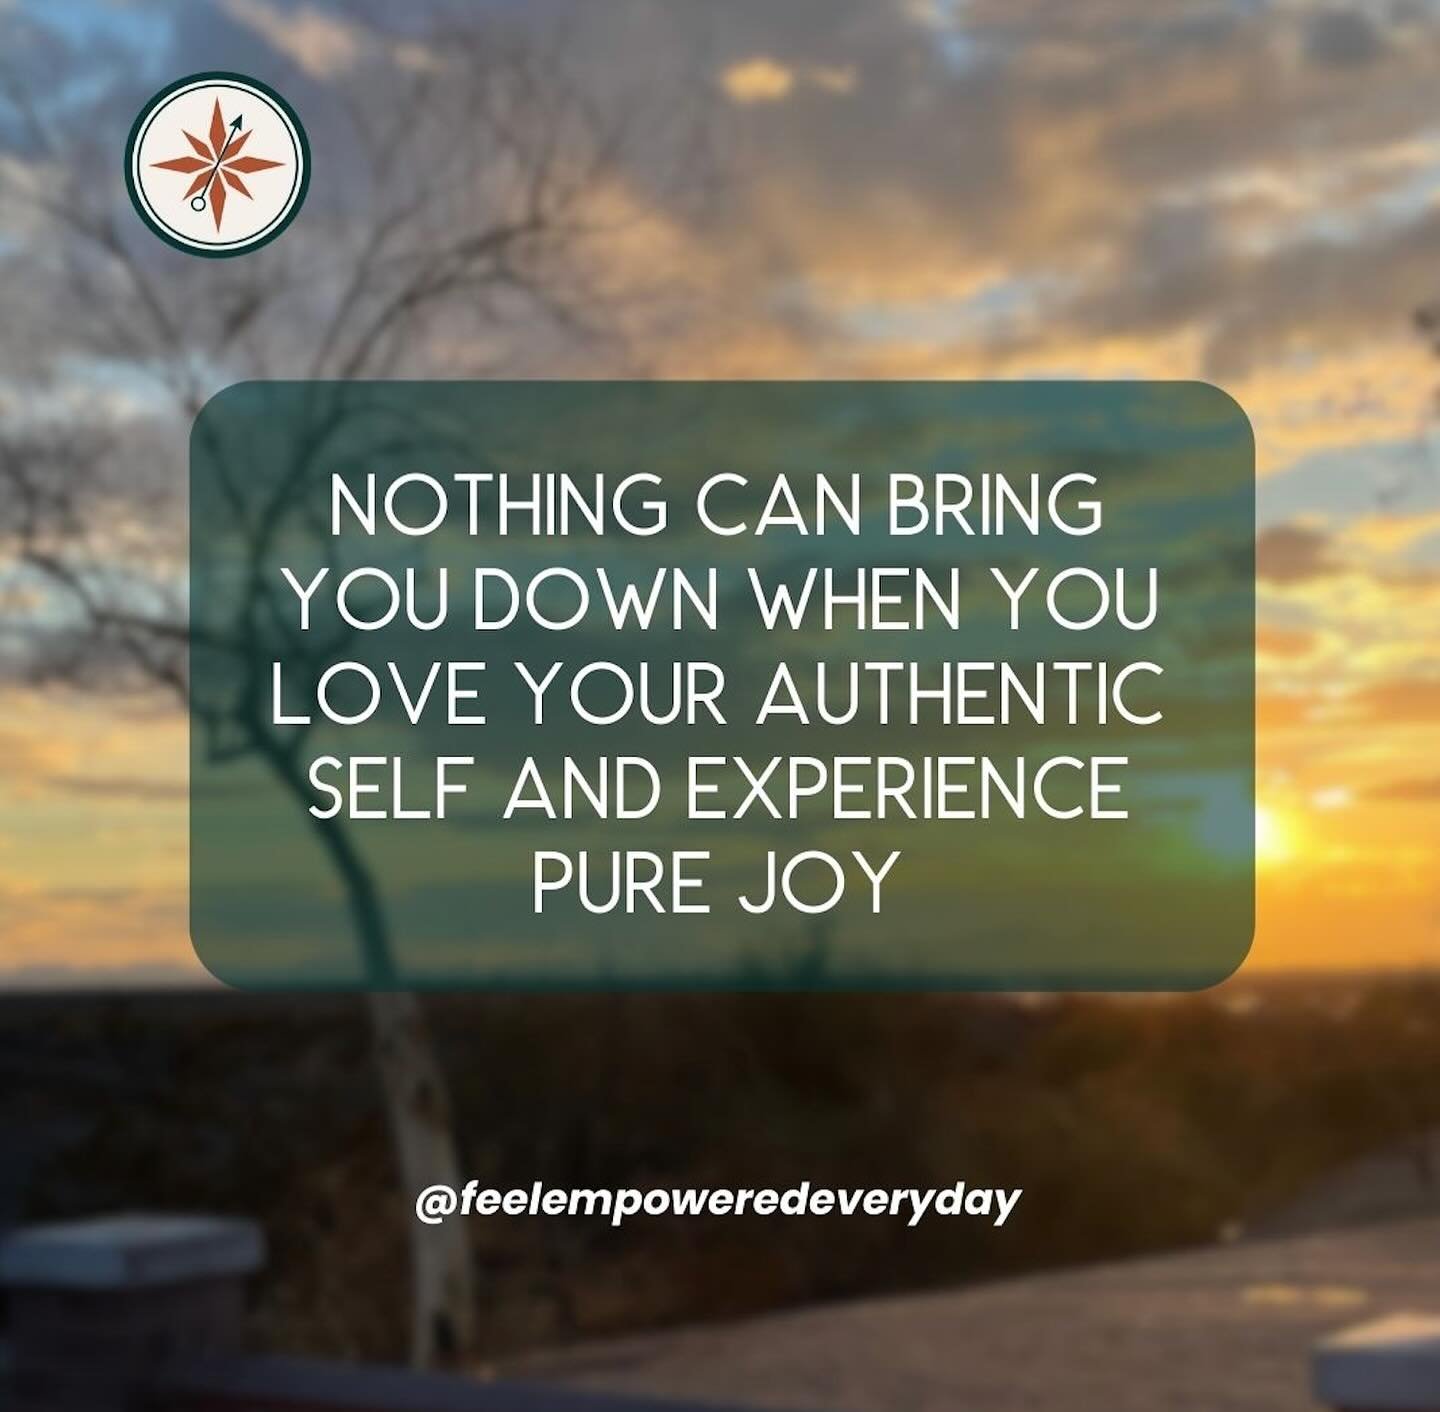 Do you agree? Or do you think that if something or someone else brings you down, loving your authentic self isn&rsquo;t going to matter. 

It&rsquo;s all about the amount of power you give to others. When we let outside sources determine how we feel,